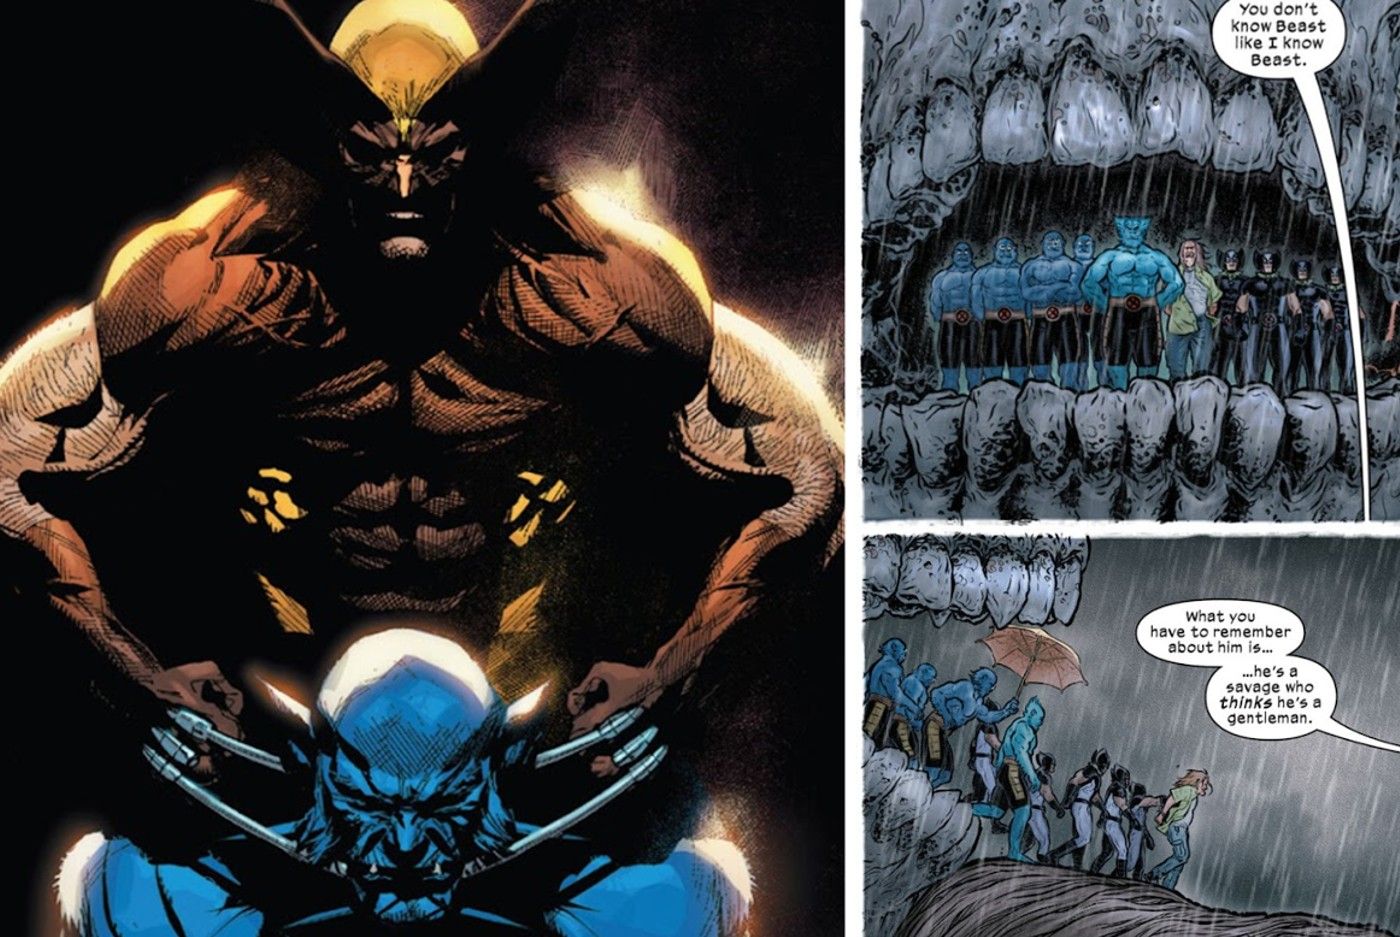 wolverine explains why he hates beast in x-men comics